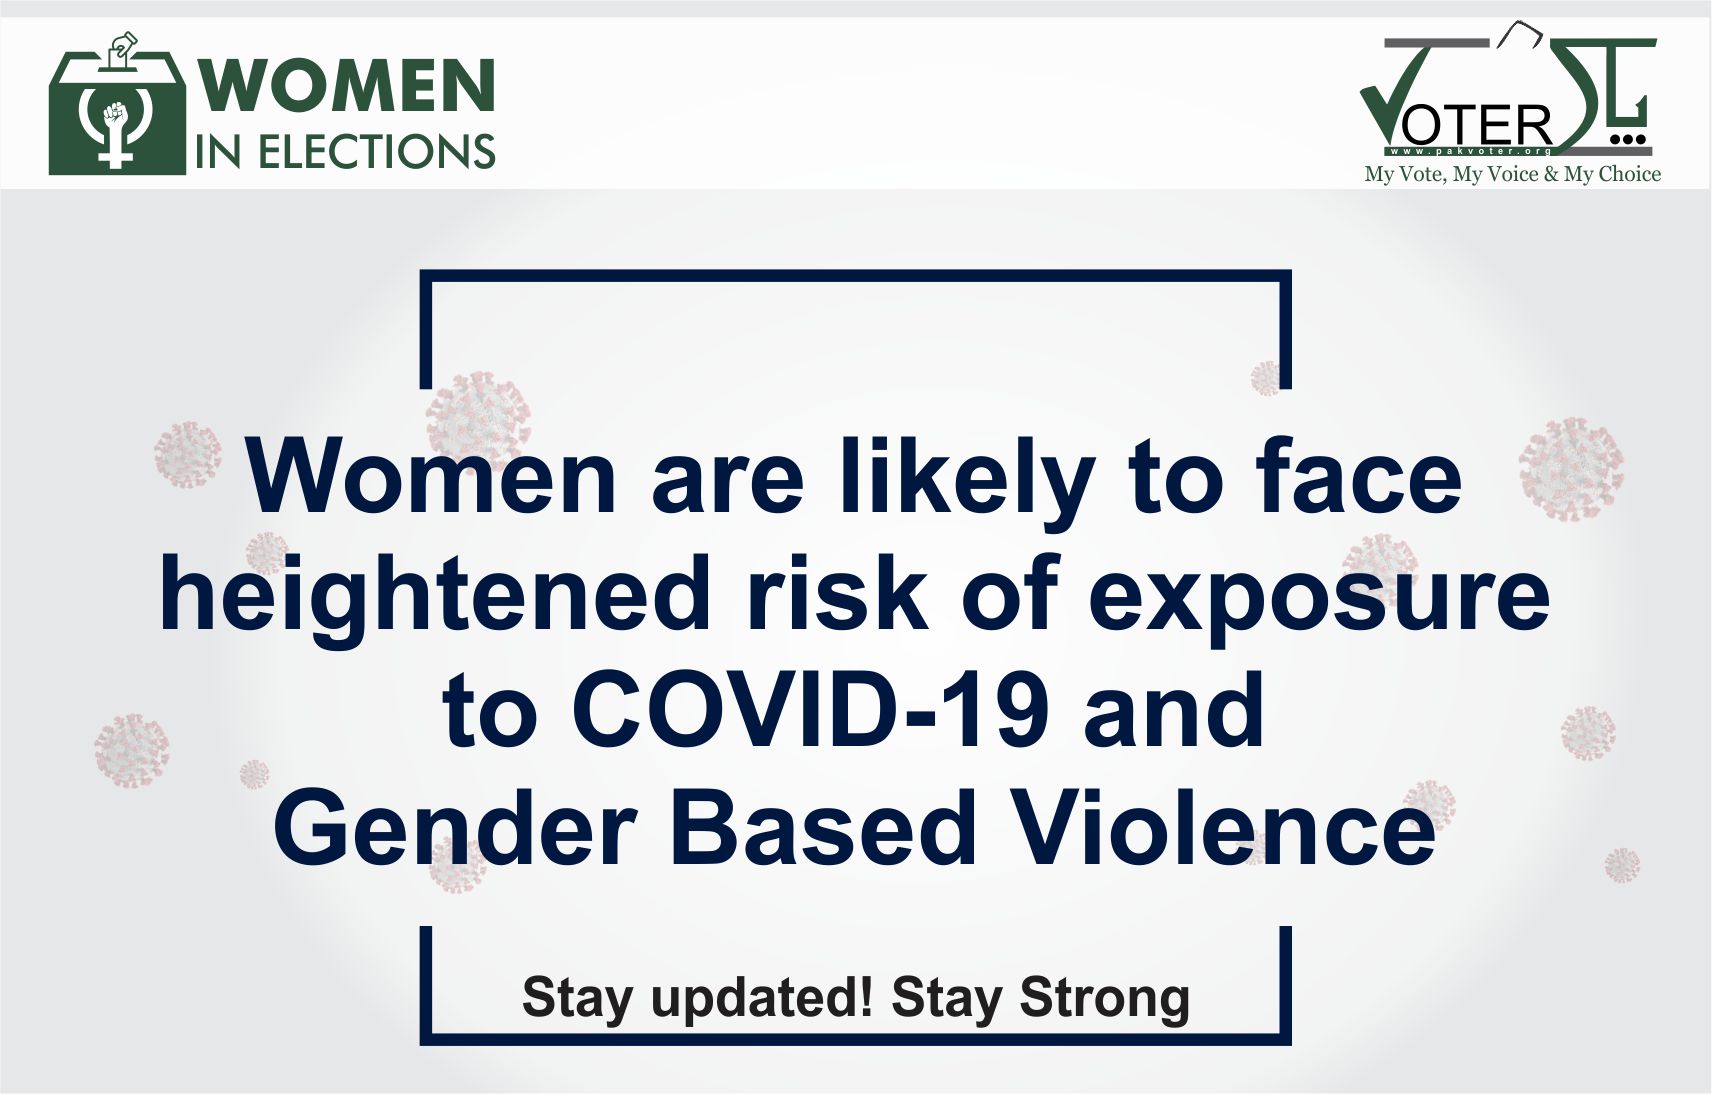 Women are likely to face a heightened risk of exposure to COVID-19 and Gender-Based Violence  Stay Connected! Stay Strong